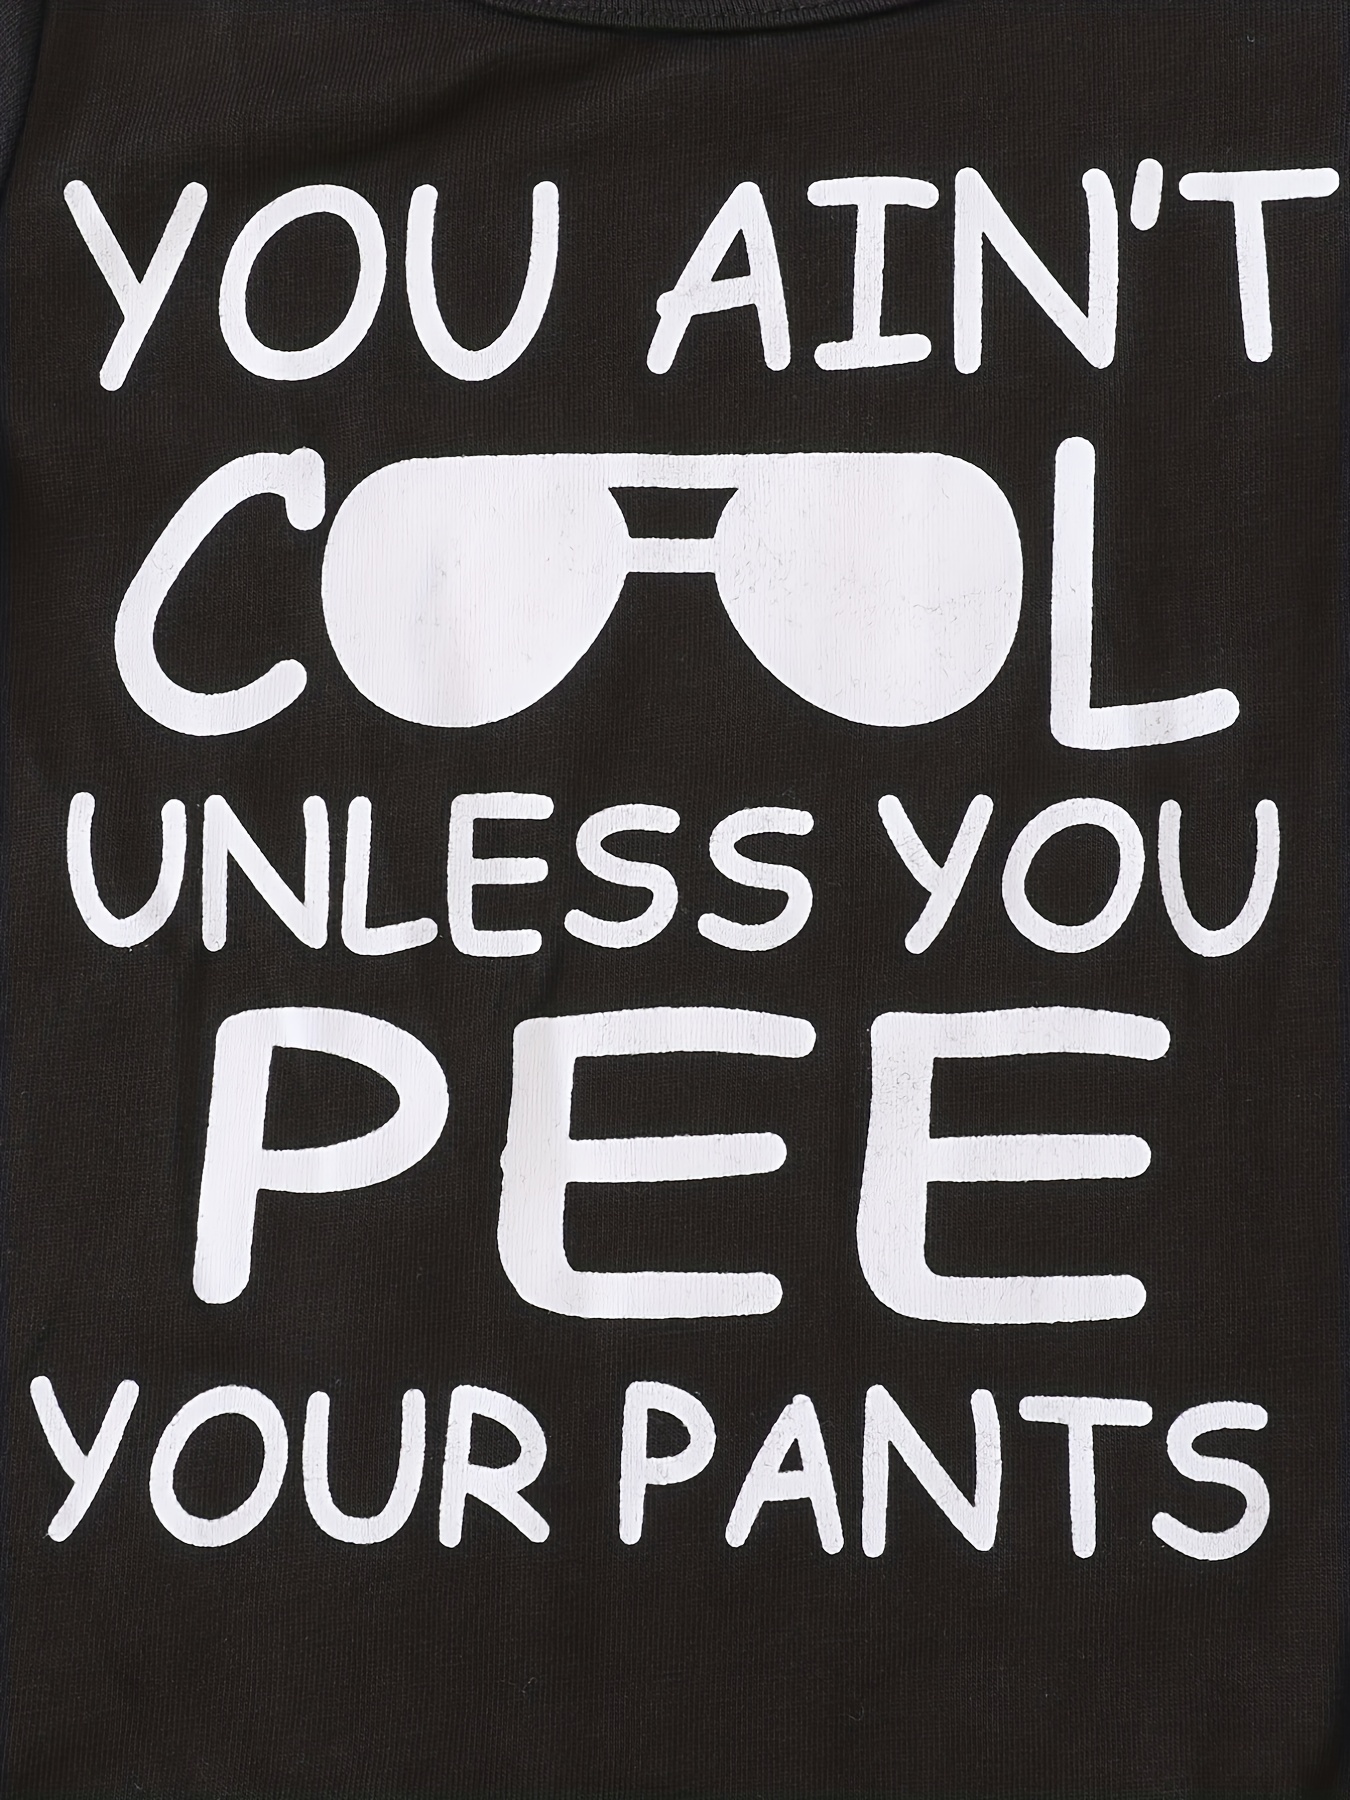 You Ain't Cool Unless You Pee Your Pants Kids T-Shirt for Sale by